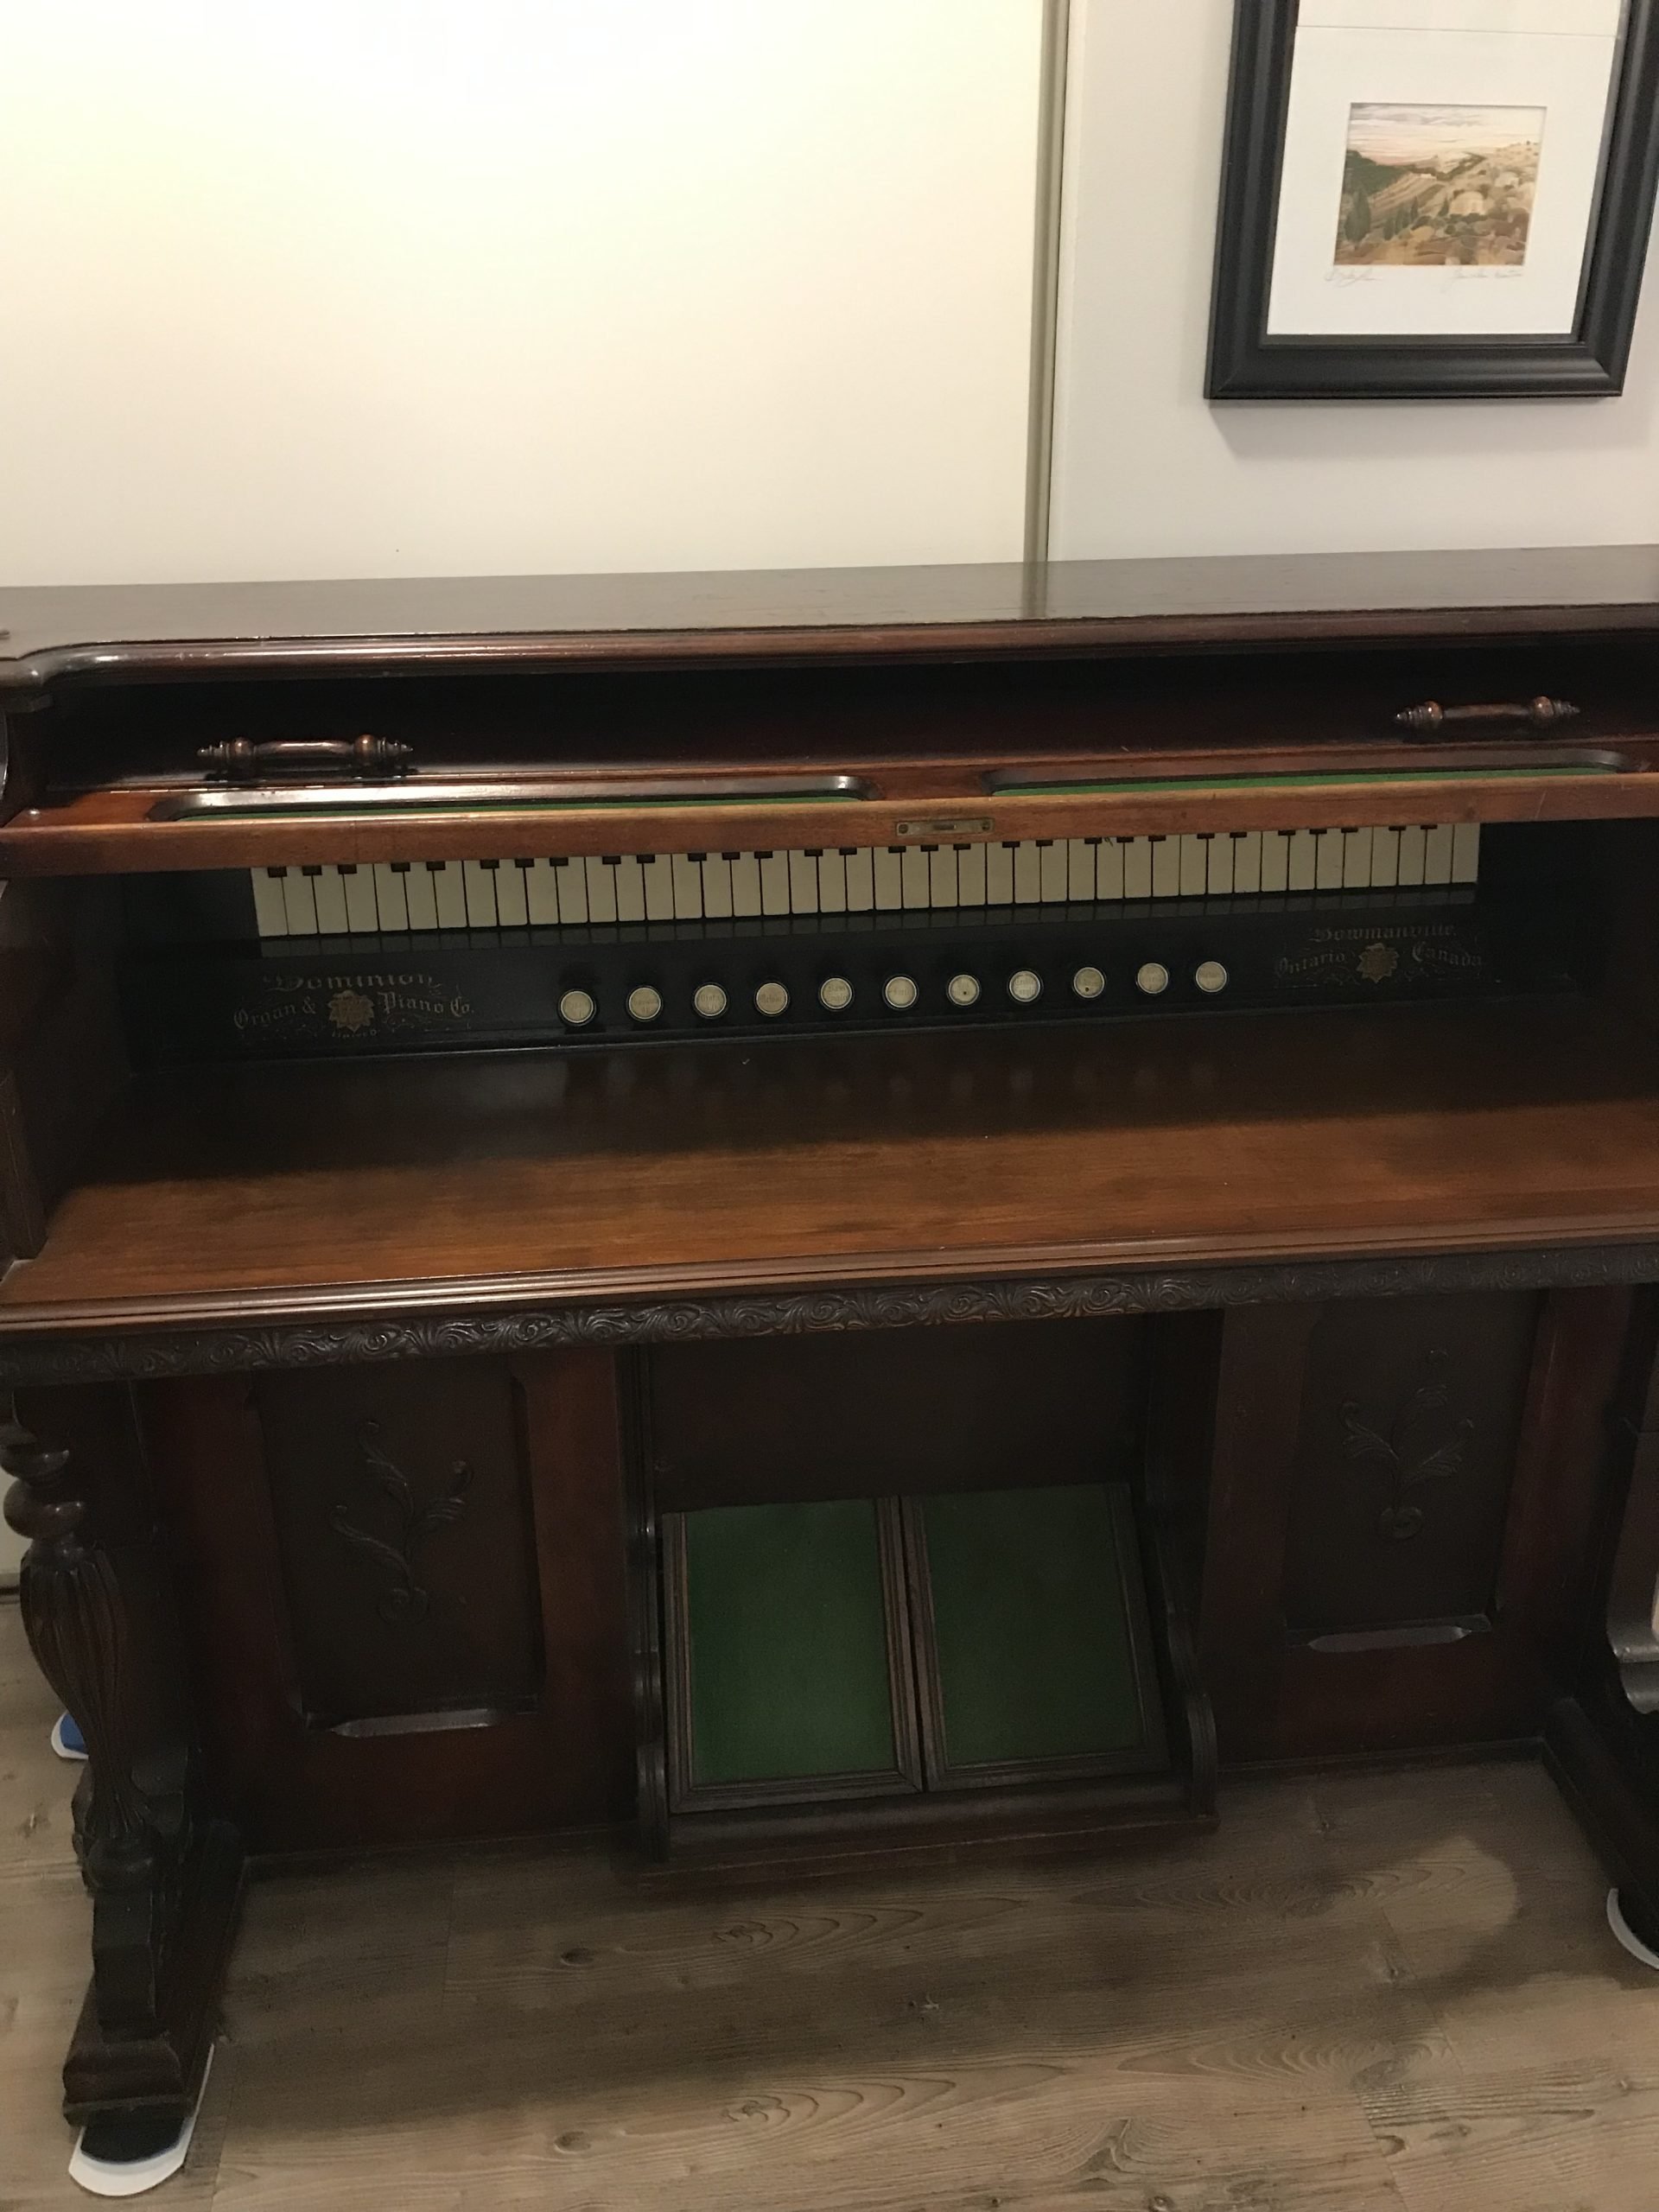 Al large piano that was removed by junk professionals